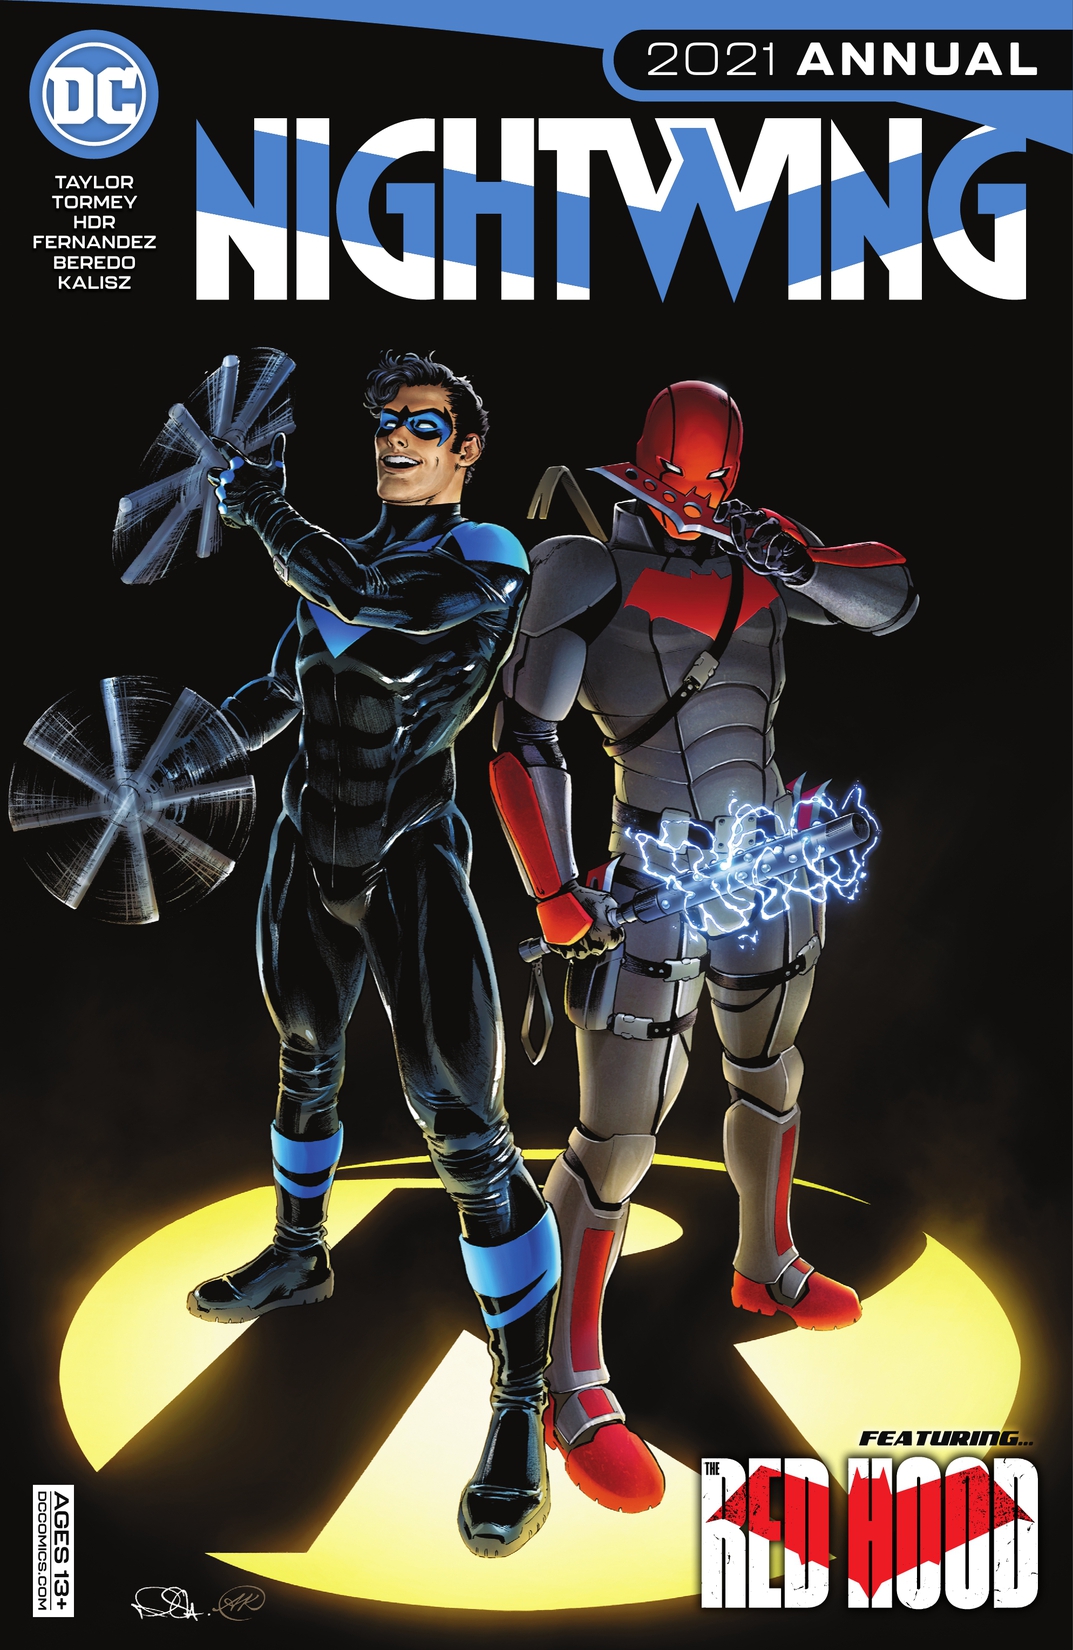 Nightwing 2021 Annual (2021) #1 preview images